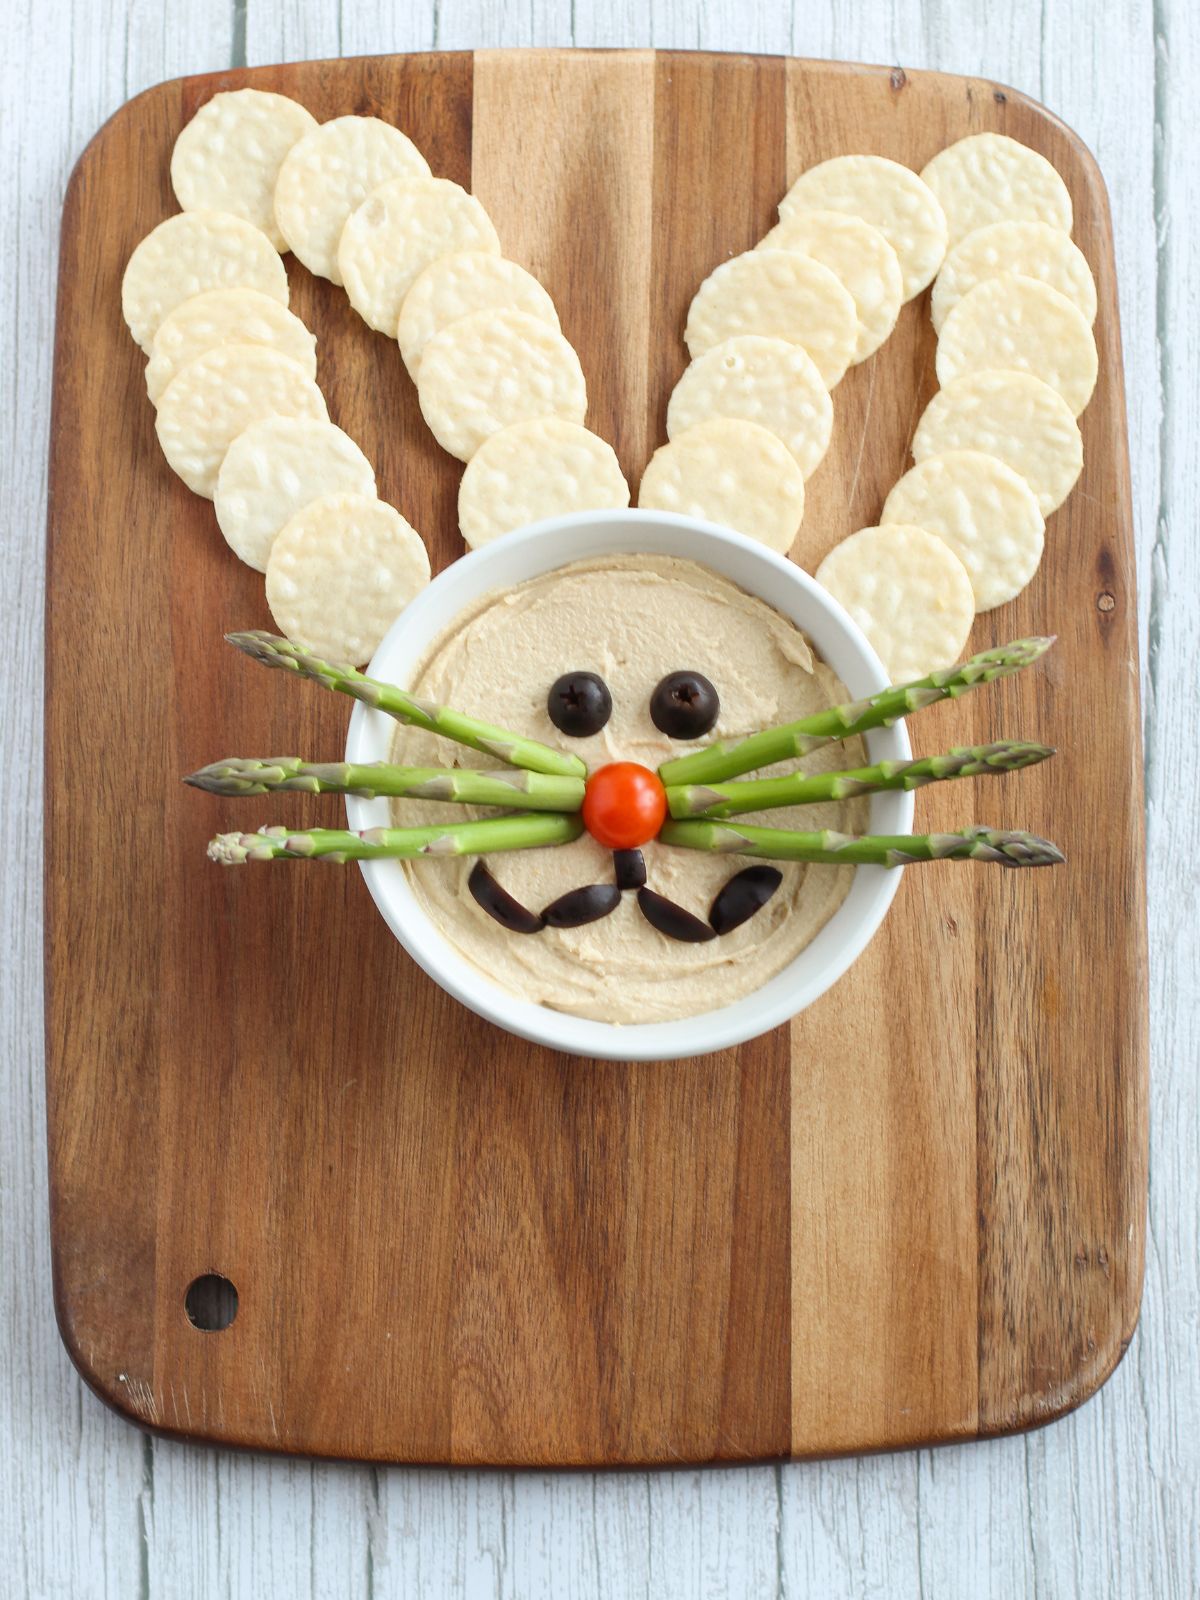 Bunny face made from hummus and vegetables